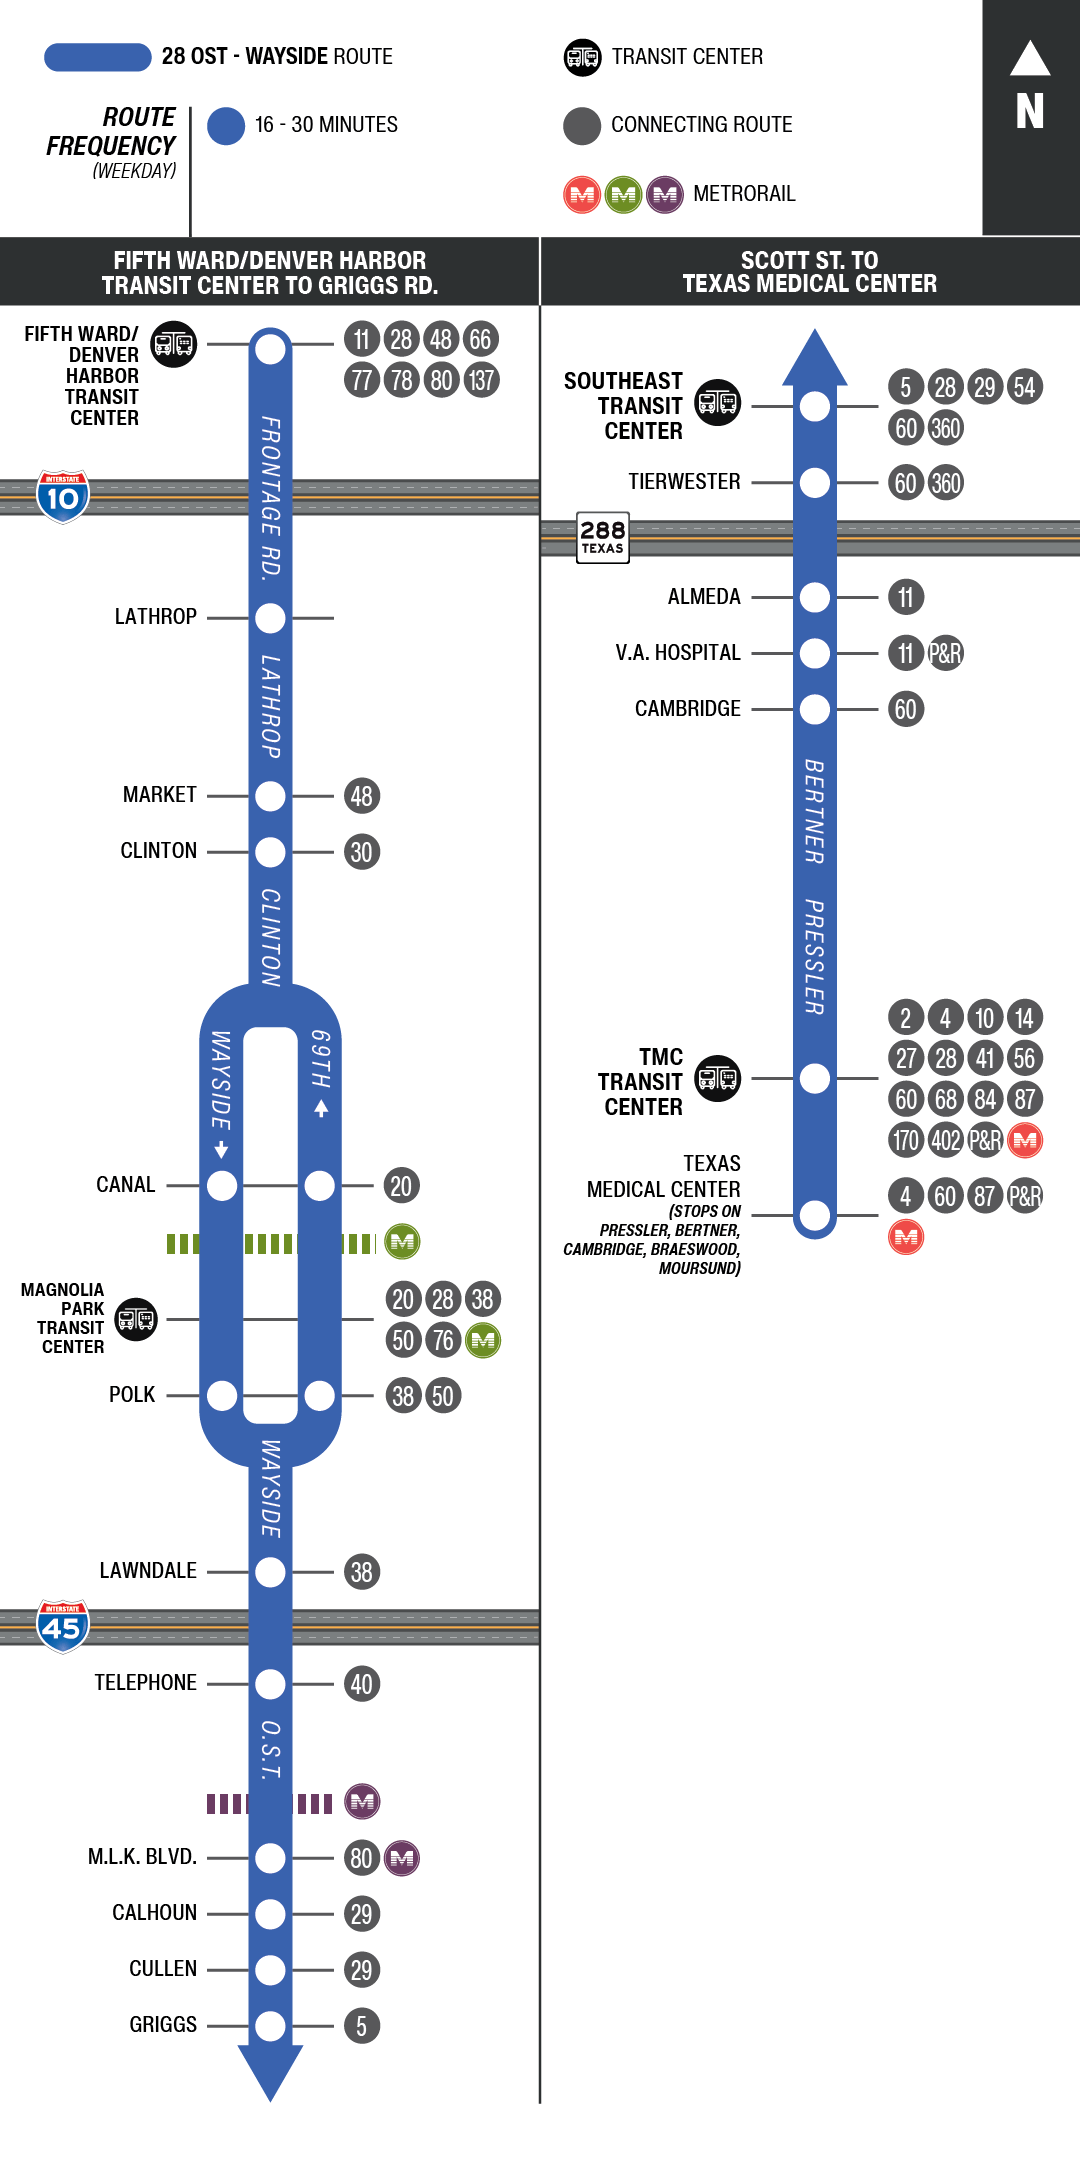 Route map for 28 OST / Wayside bus